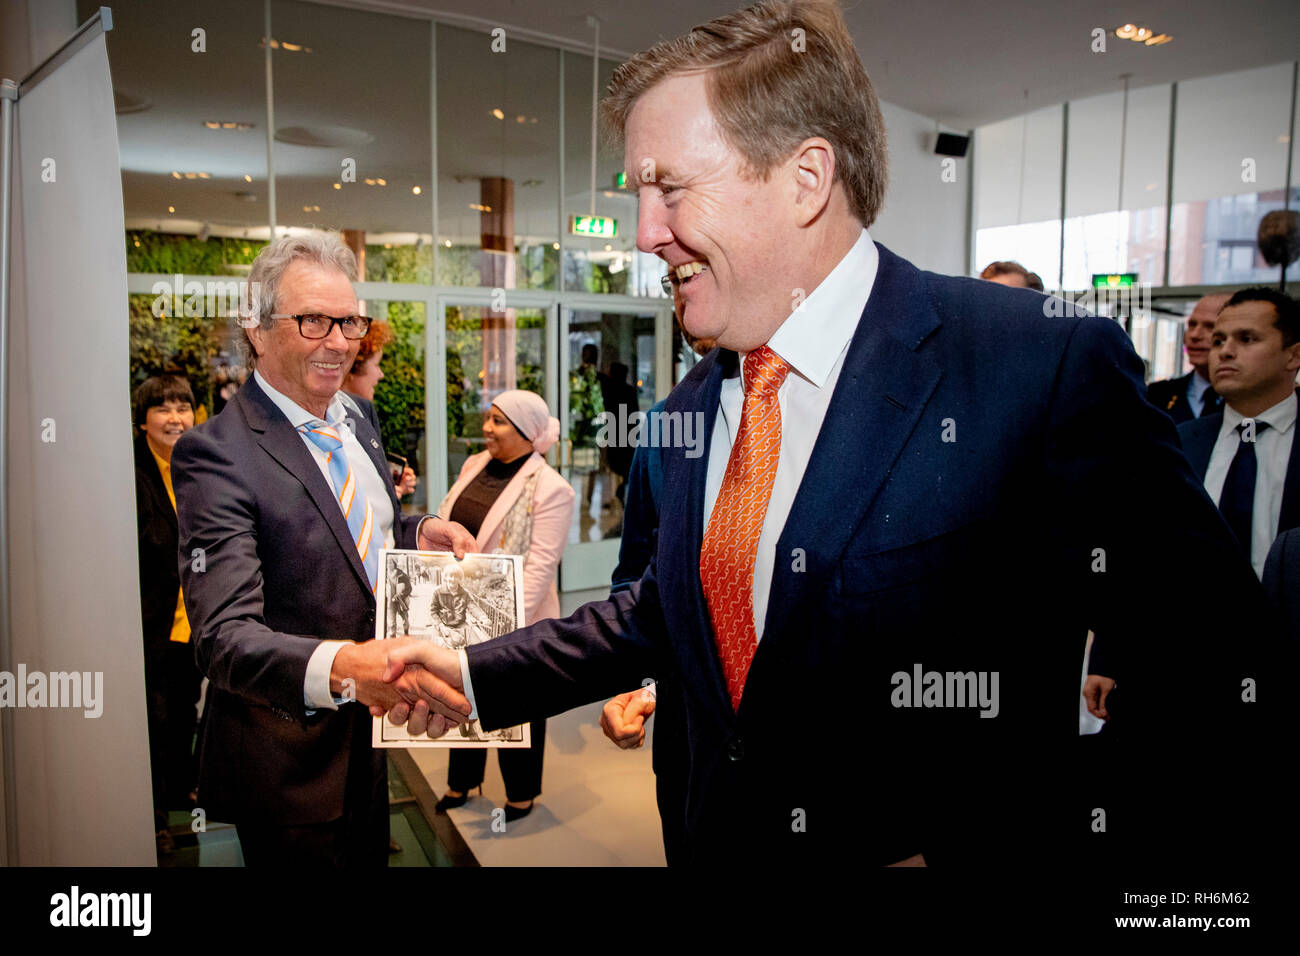 Hilversum, Netherlands. 1st Feb, 2019. King Willem-Alexander receives an paparazzi picture of himself at the age of 16 from paparazzi photographer Leo Vogelzang during the award ceremony of the Zilveren Camera for the best photojournalist of the year in Hilversum, Netherlands, 1 February 2019. Winner of the award is Cynthia Boll for her photo series Sinking Cities Jakarta. Credit: Patrick van Katwijk/ |/dpa/Alamy Live News Stock Photo